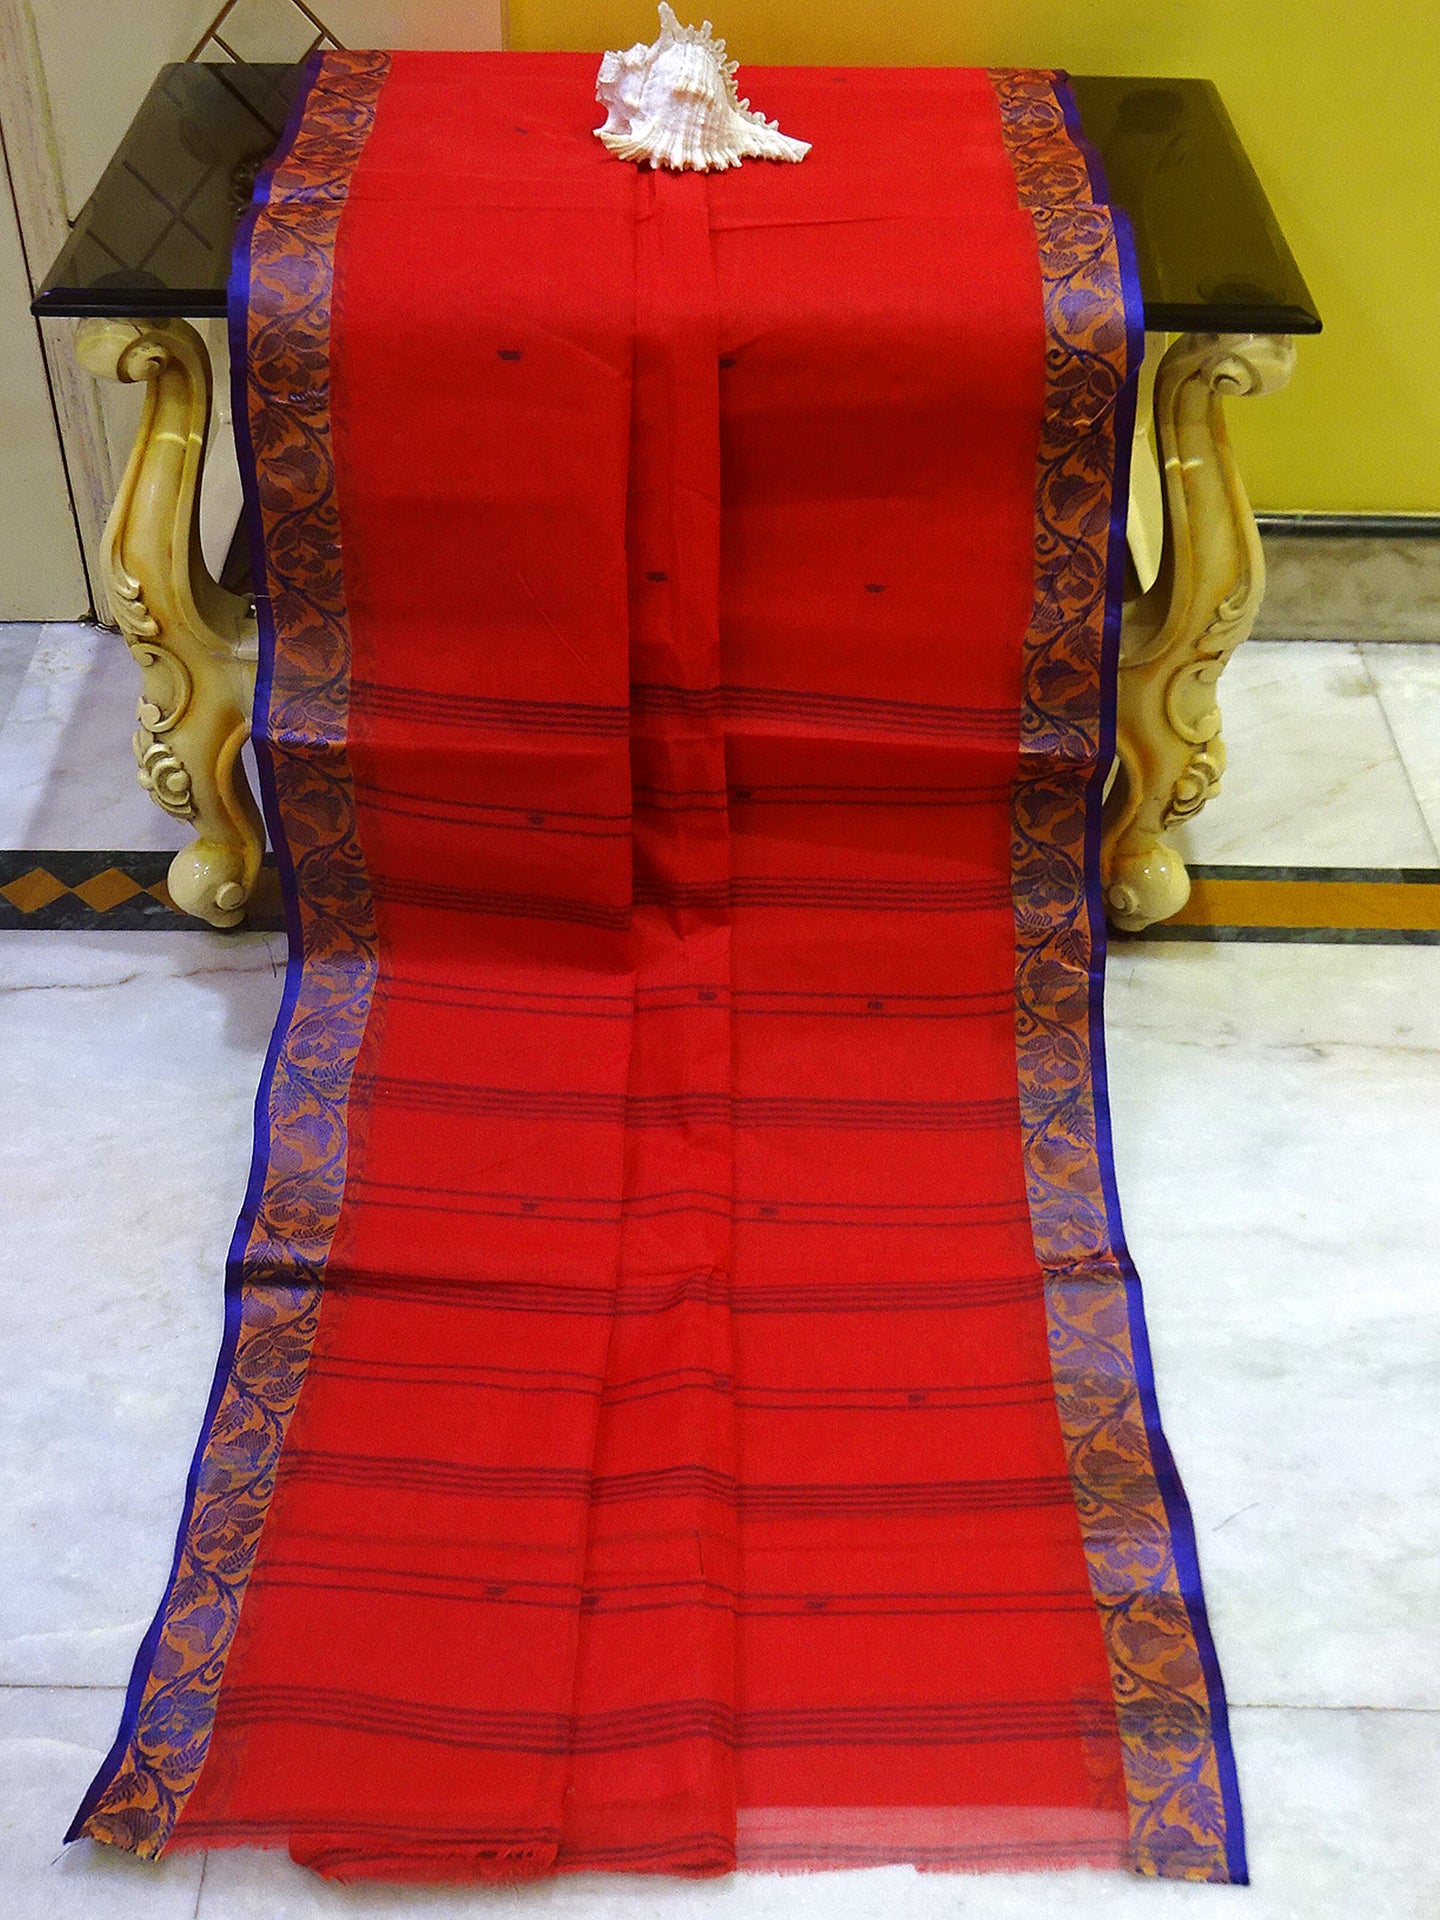 Woven Floral Nakshi Motif Border Work Bengal Handloom Cotton Saree in Tomato Red and Navy Blue